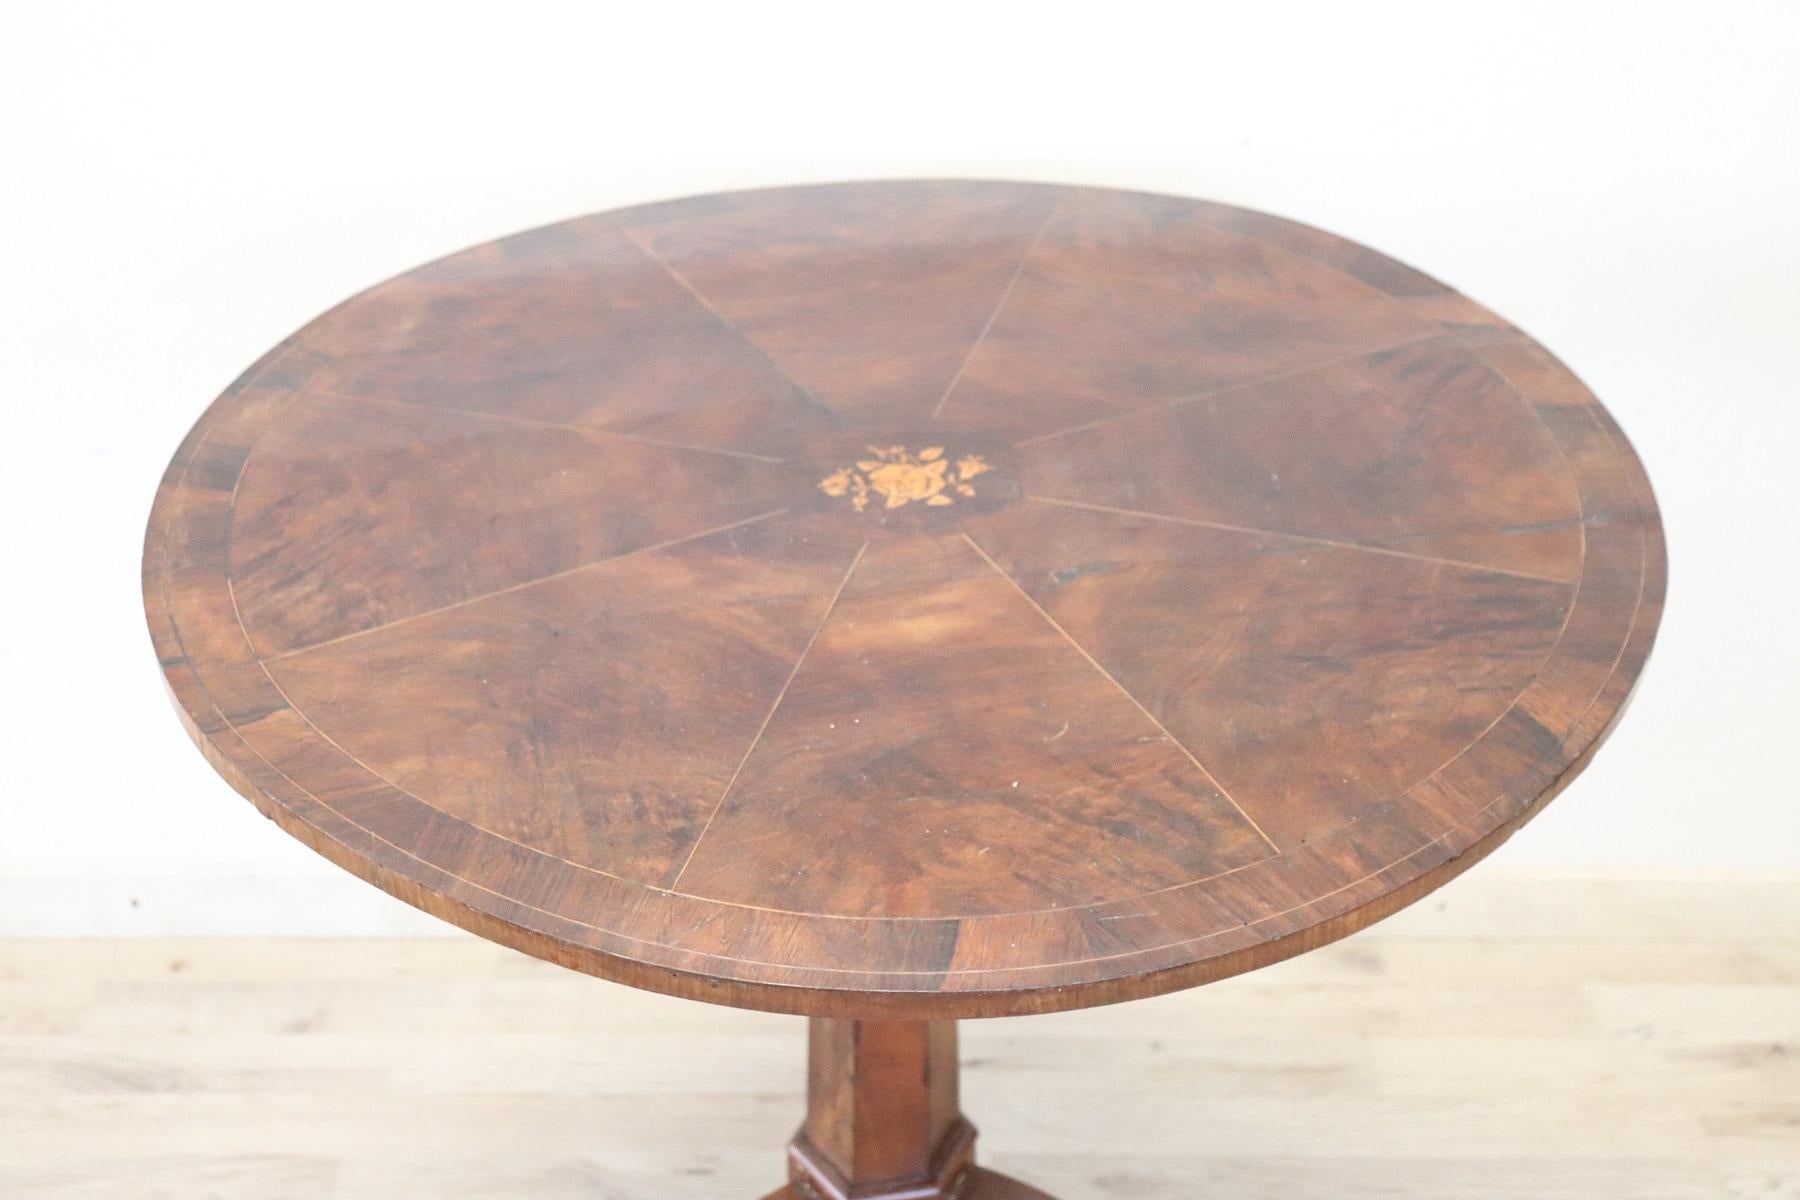 Beautiful important antique round table, 1850s in walnut. The plan presents decorations in wedges with a beautiful inlaid rose in the center. The inlaid decoration is of floral taste made with small pieces of different and precious woods. Please